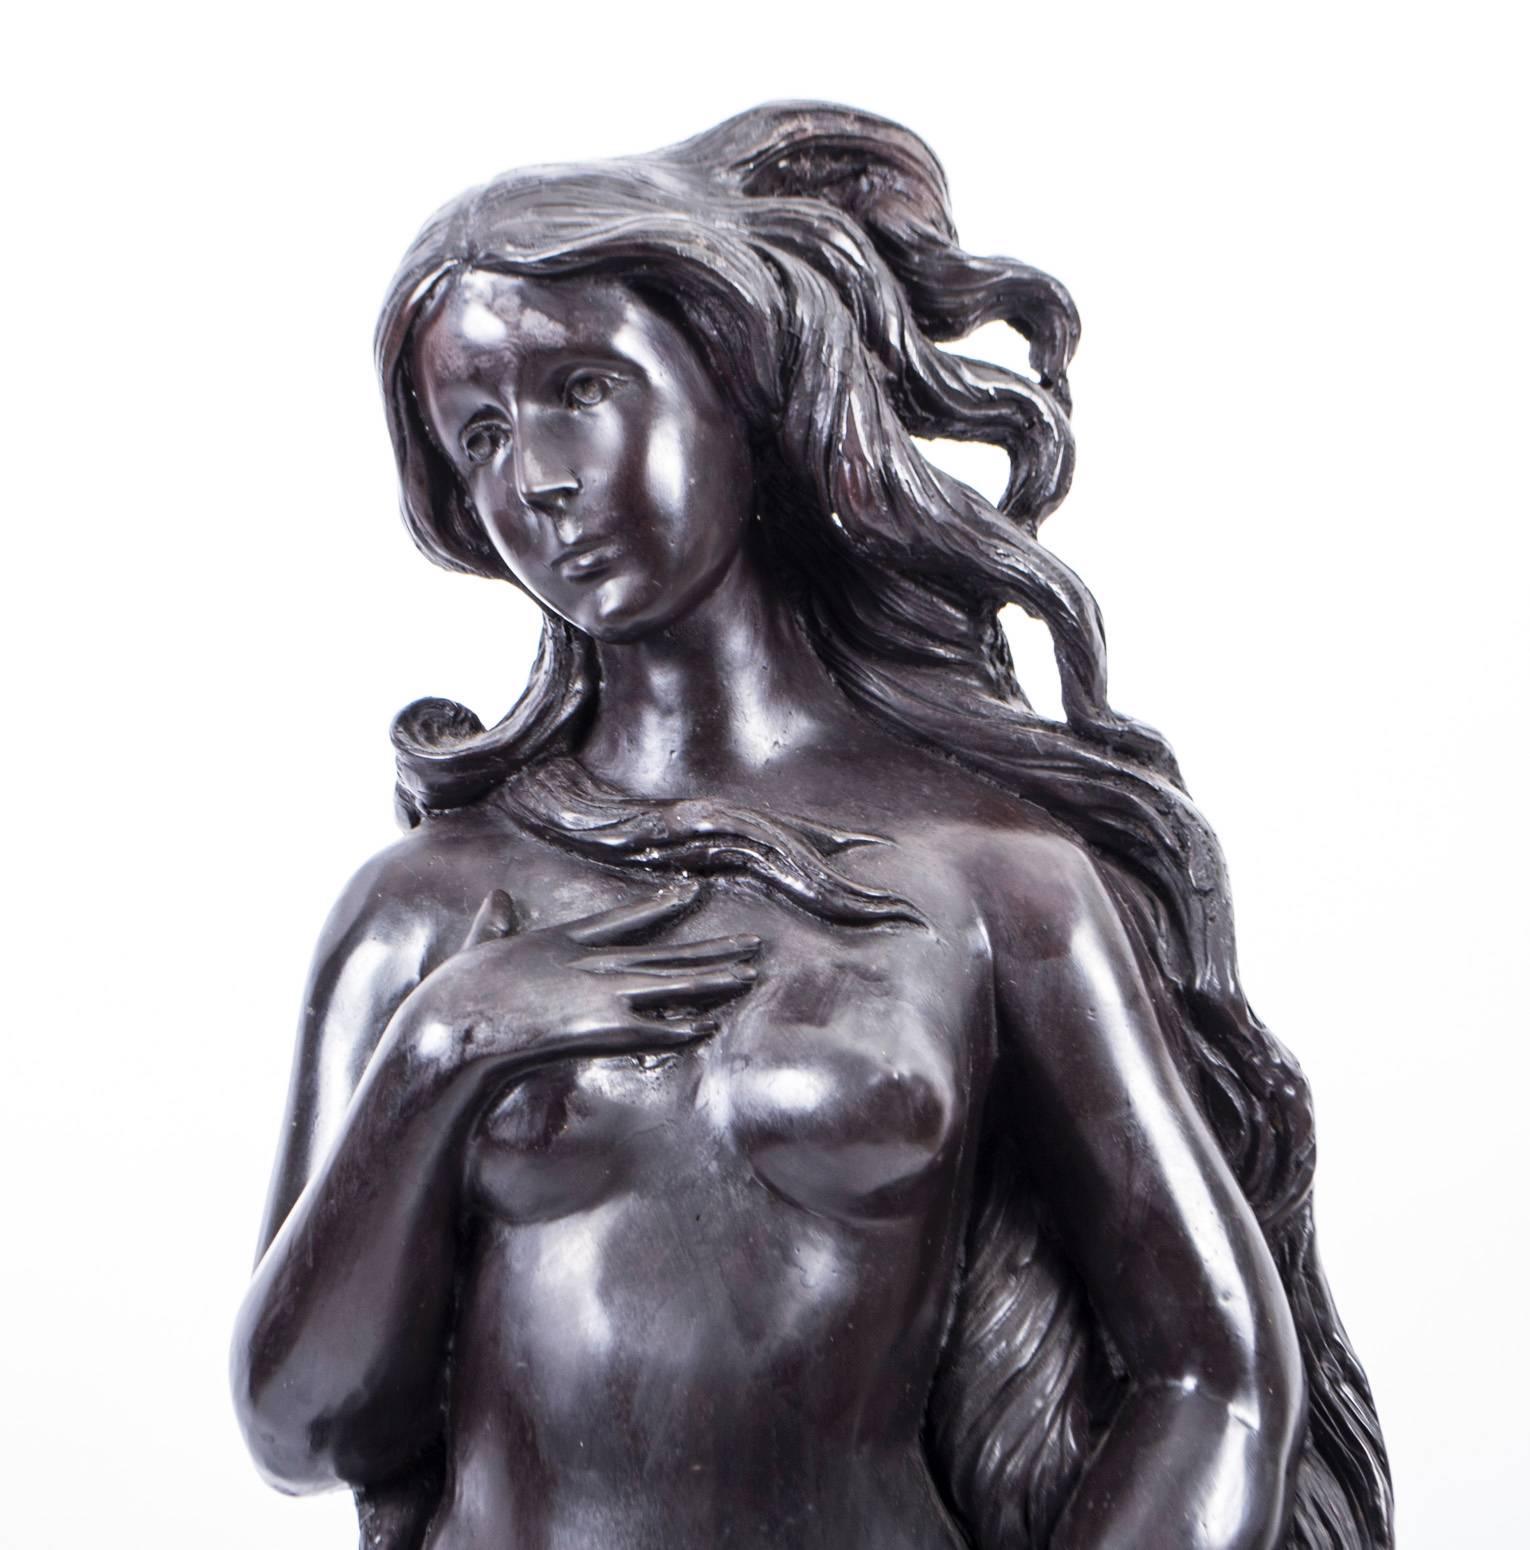 This sculpture depicts the goddess Venus, having emerged from the sea as a fully grown woman, arriving at the sea-shore.

It dates from the last quarter of the 20th century.

This reproduces the Venus depicted in the Italian Renaissance painting by